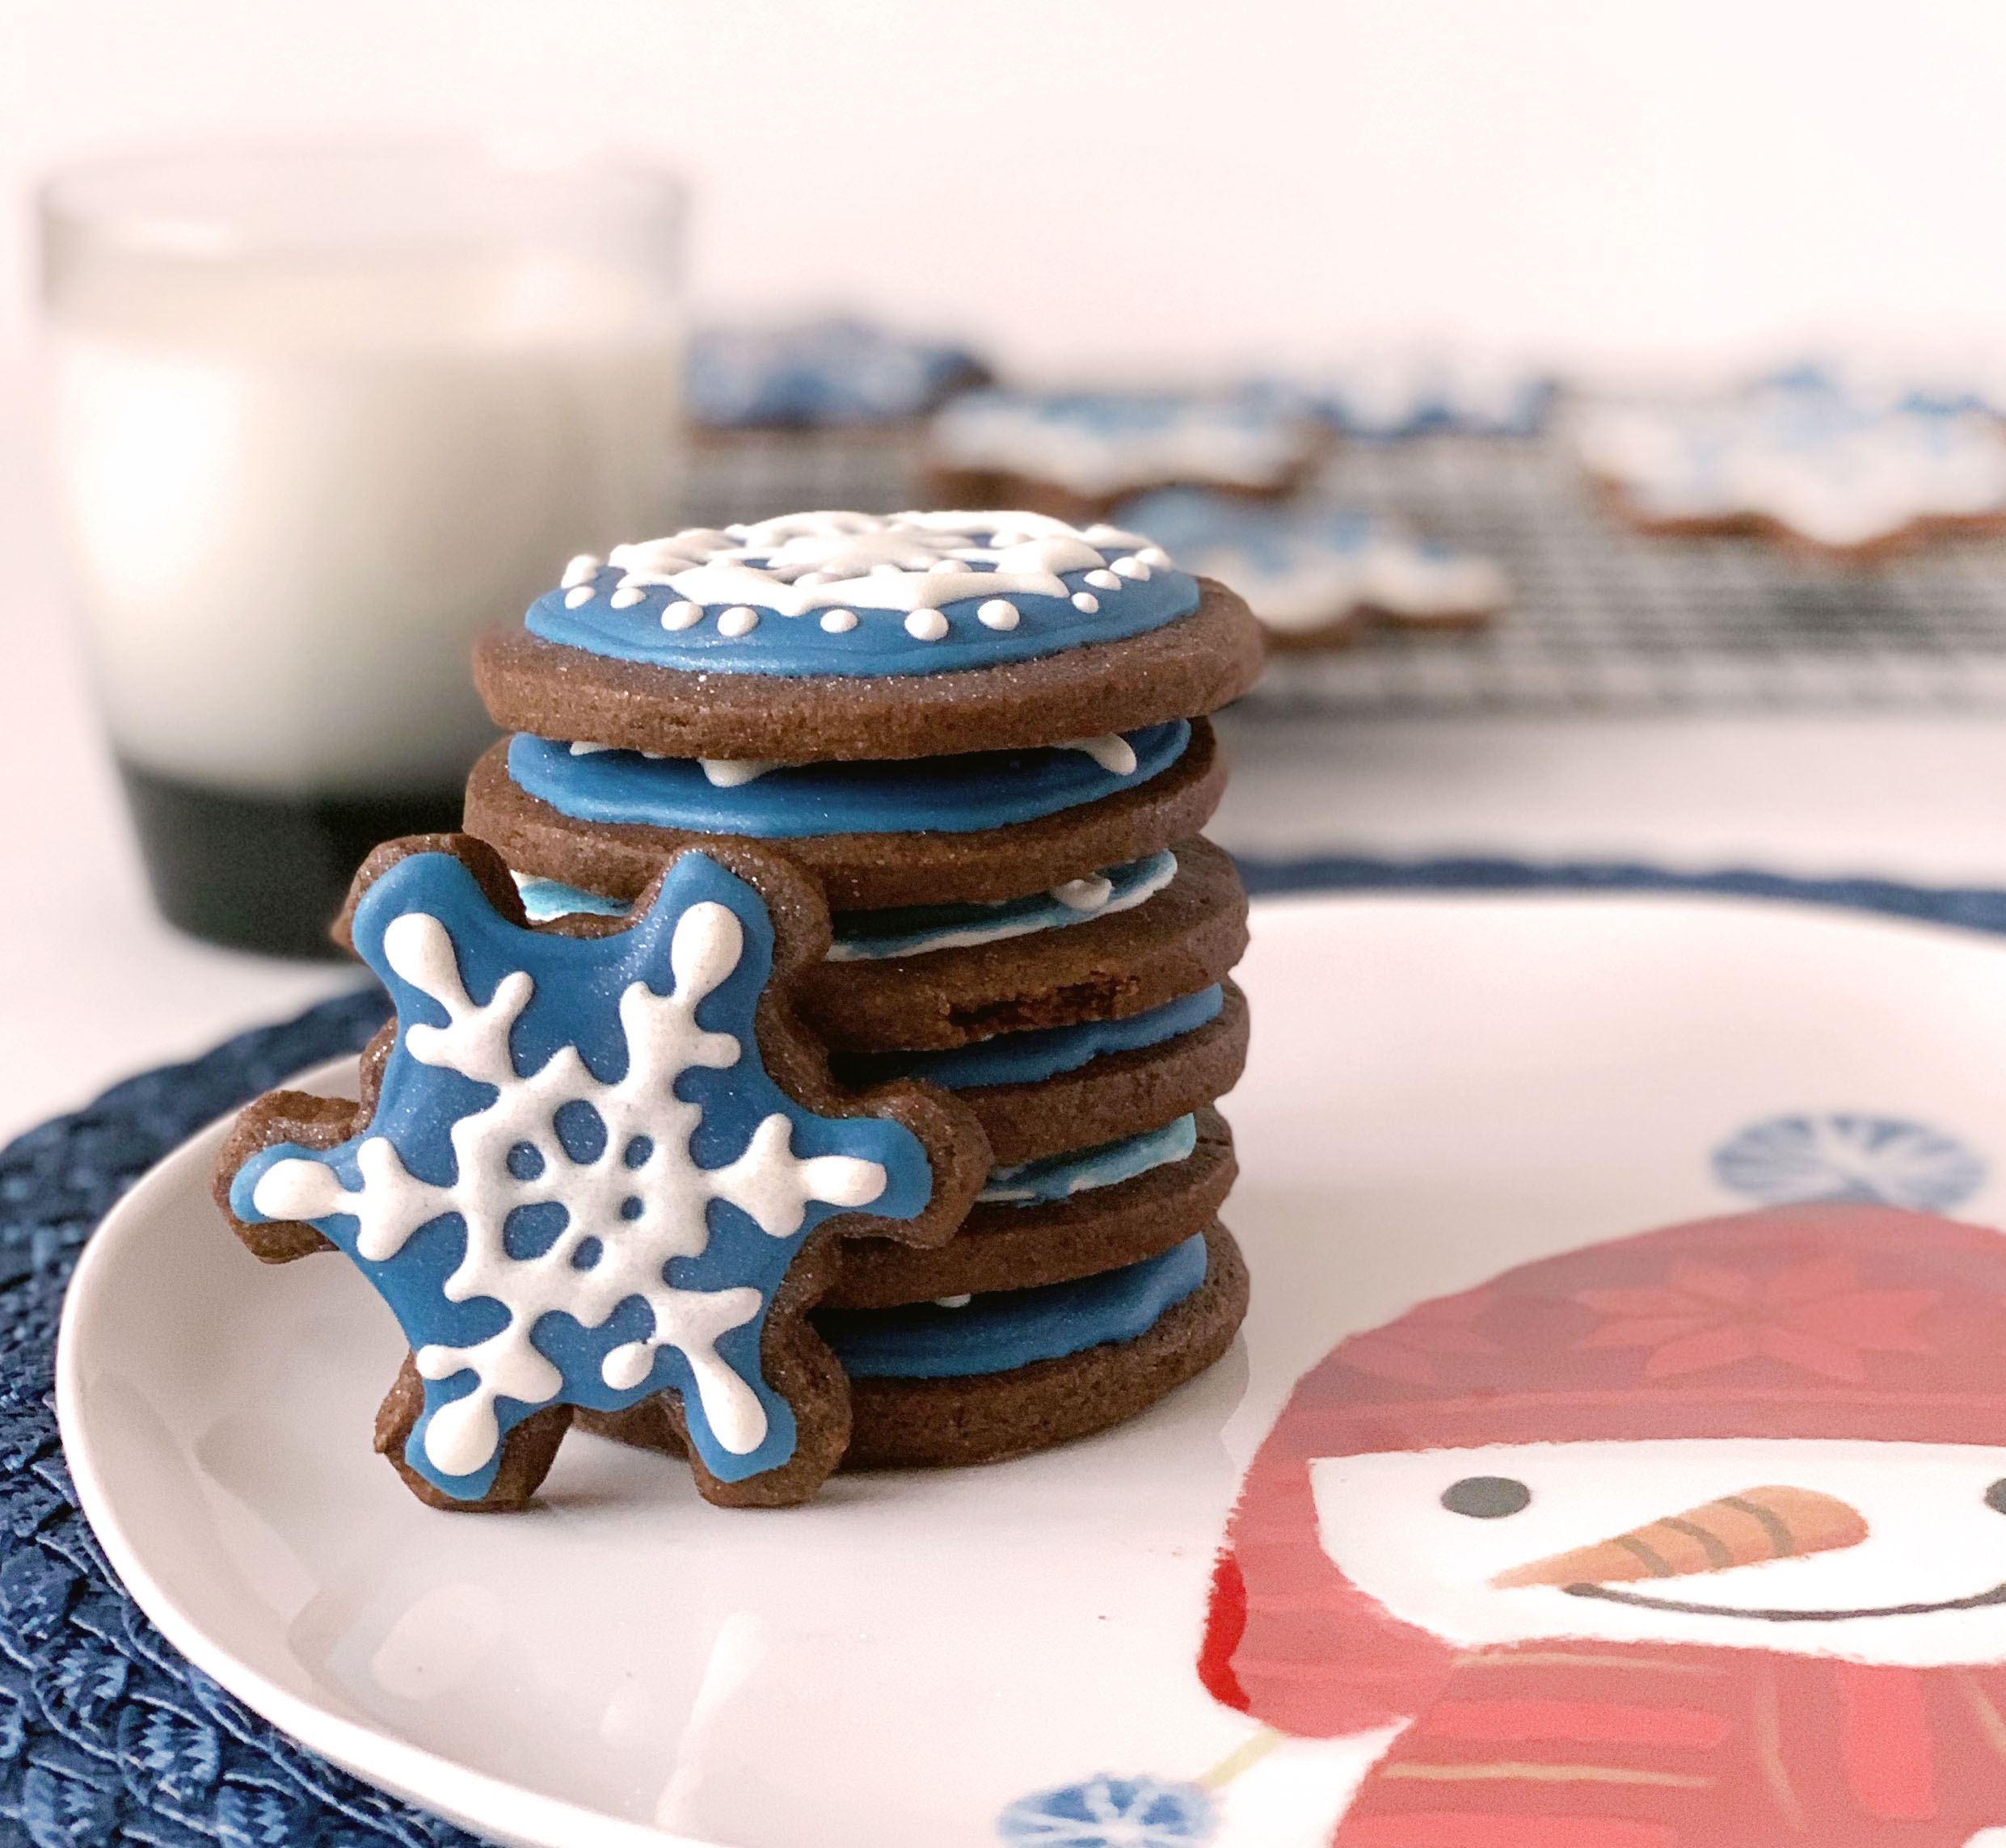 The best recipe for the chewiest, chocolate cutout cookies. These are no-spread chocolate cookies, perfect for cutting and icing into any shapes. #cookies #chocolate #cutout #snowflake